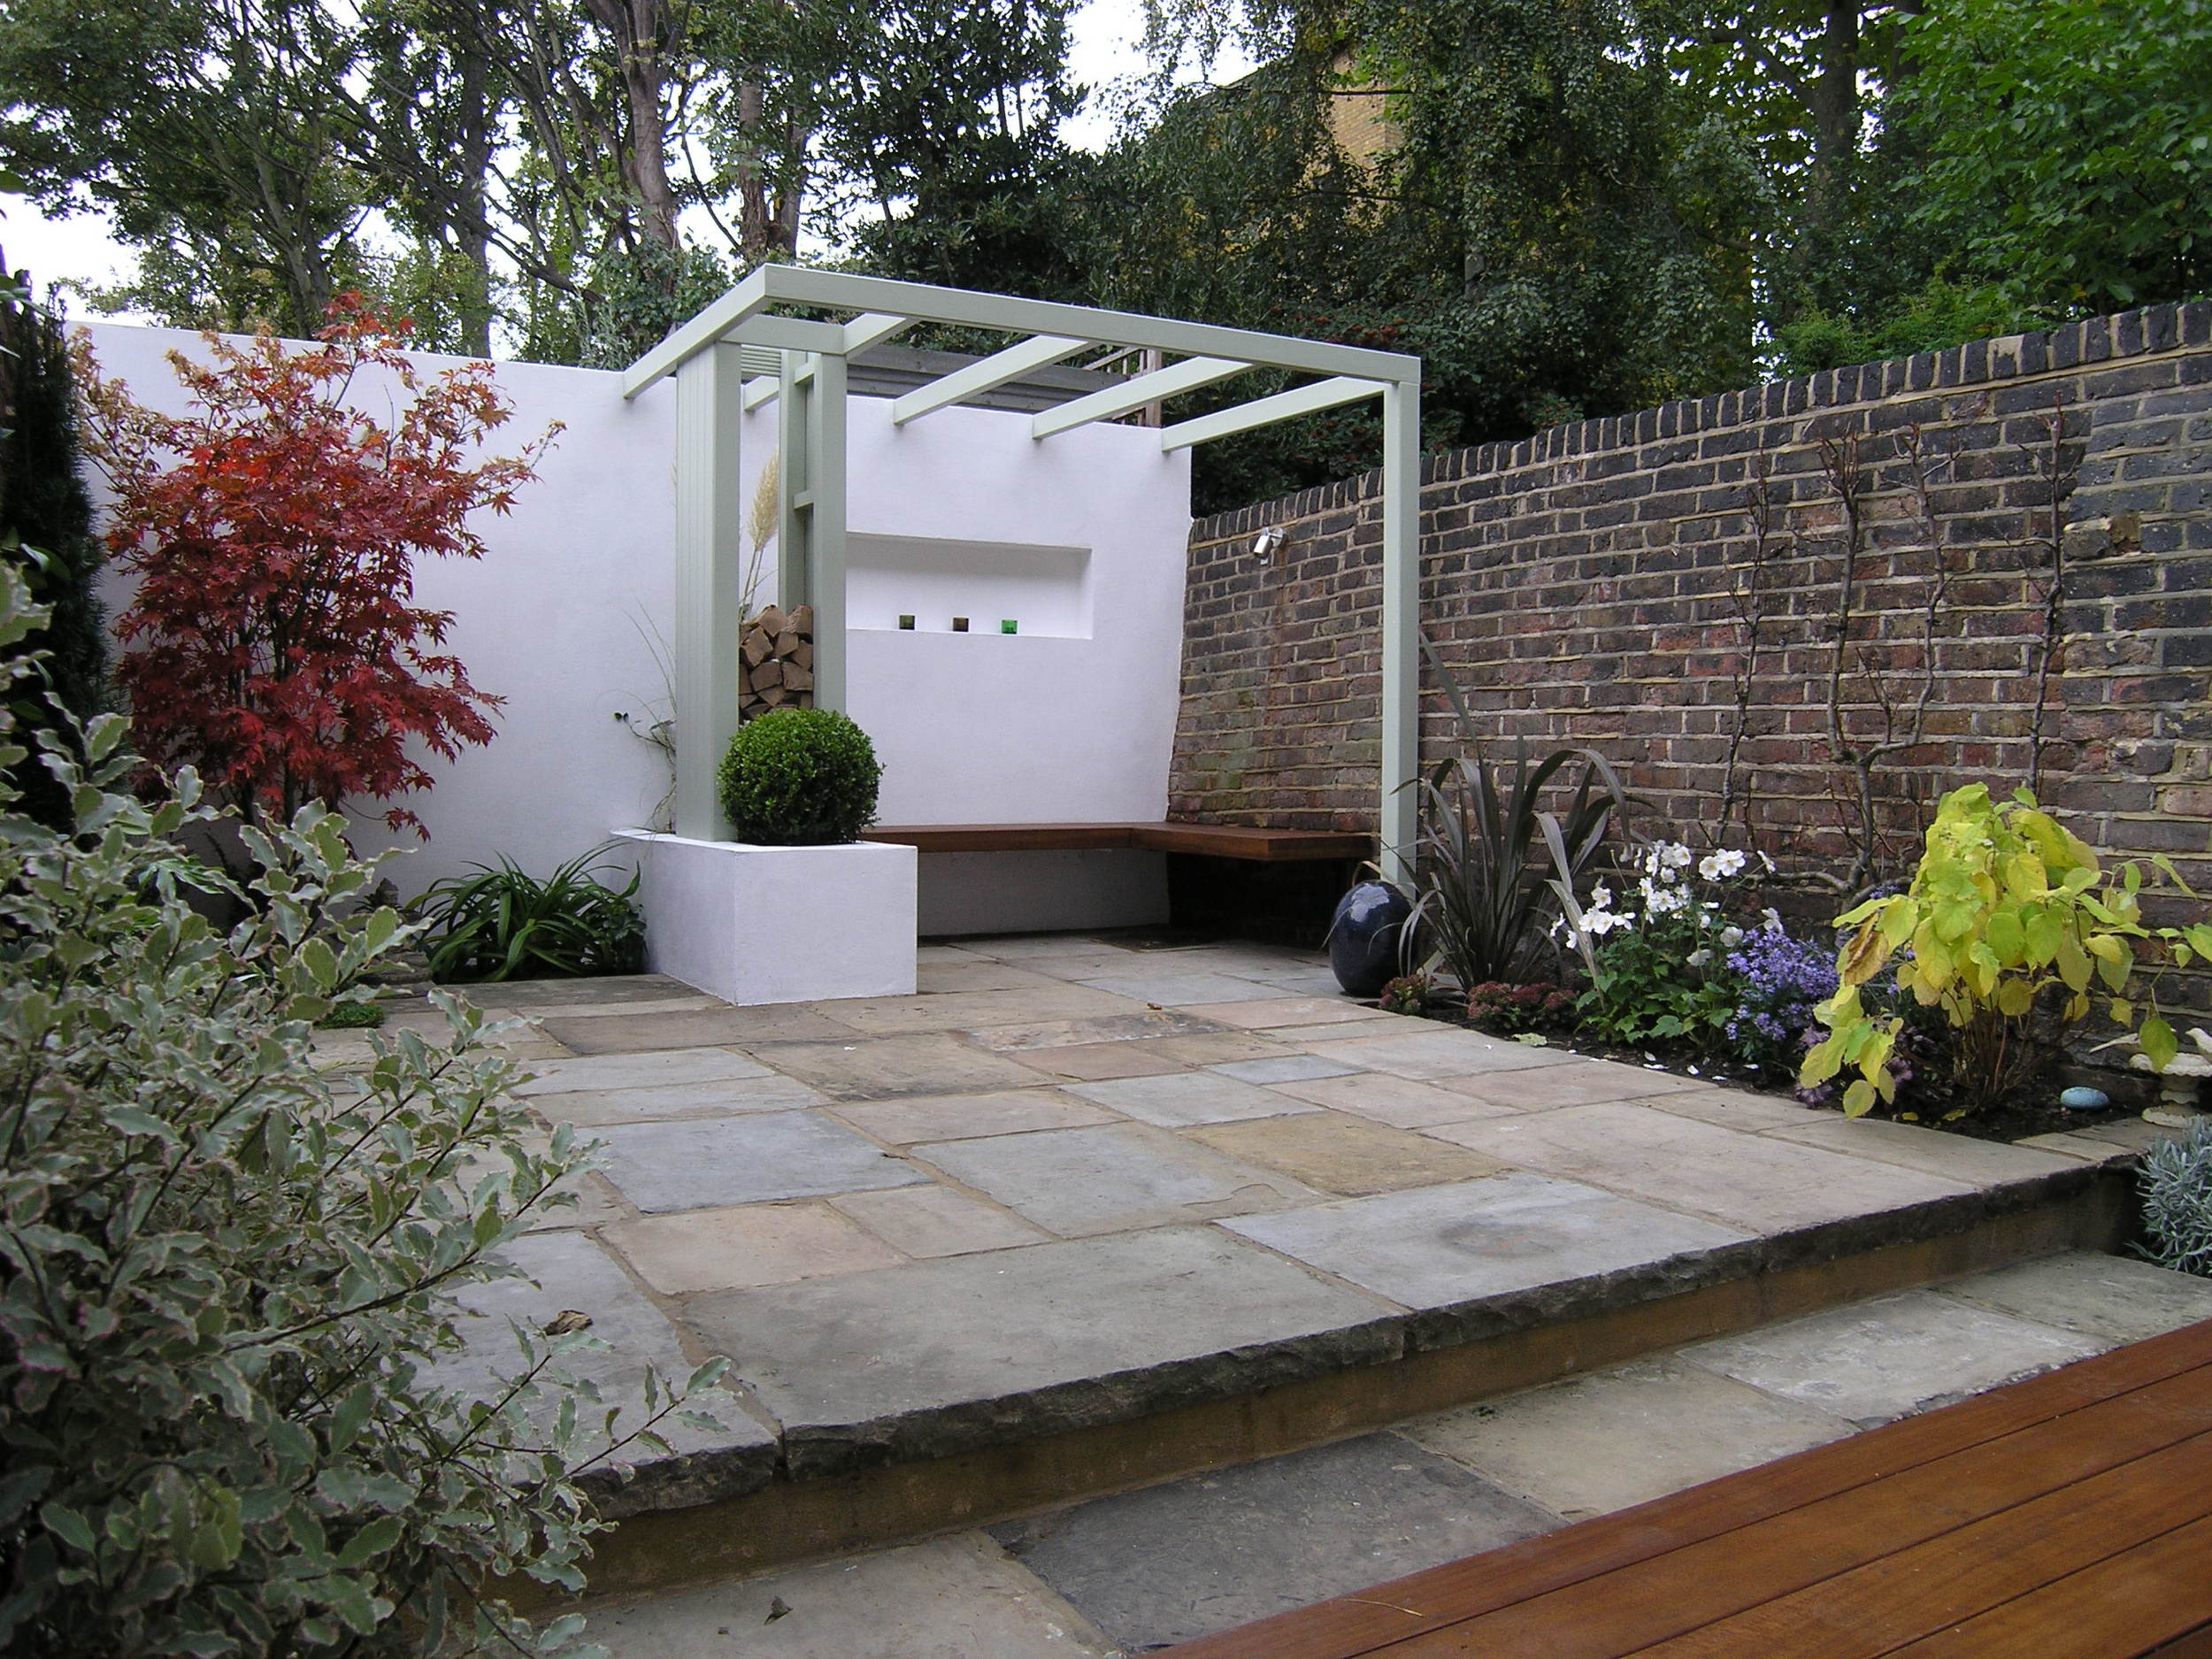 Courtyard garden makeover in N1 with Yorkstone patio and plants